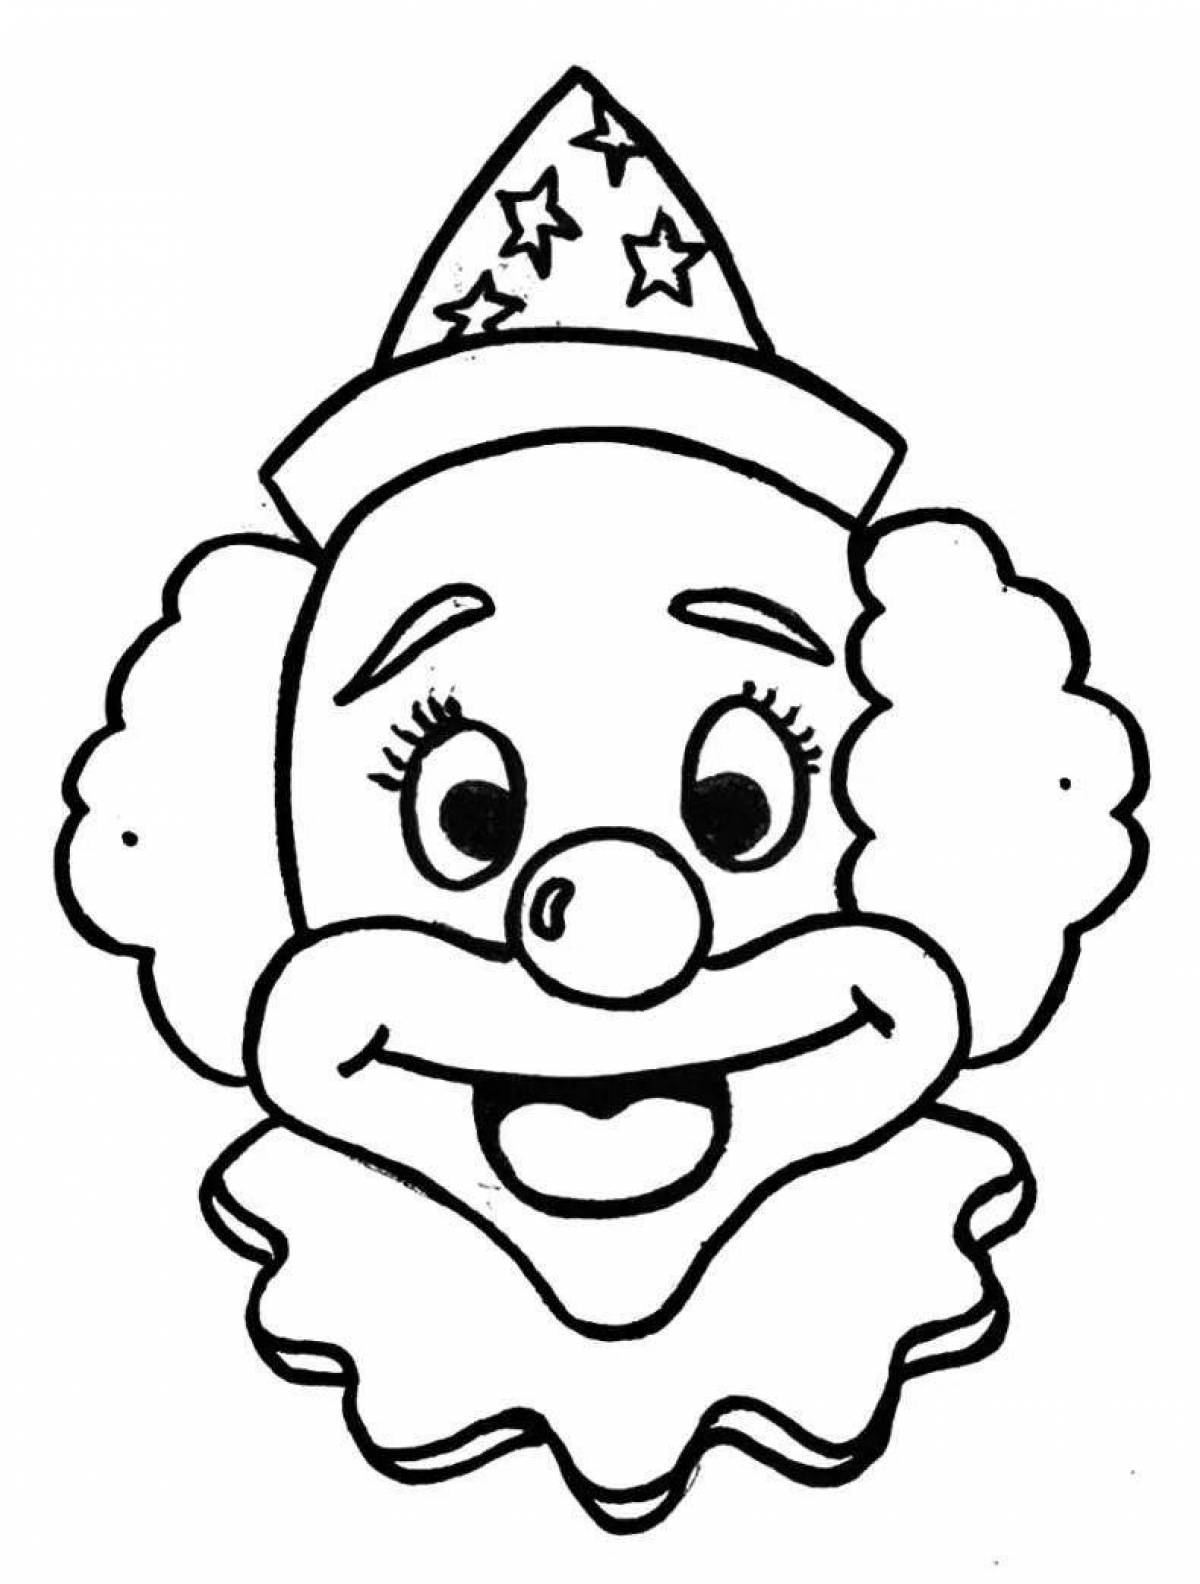 Adorable clown mask coloring page